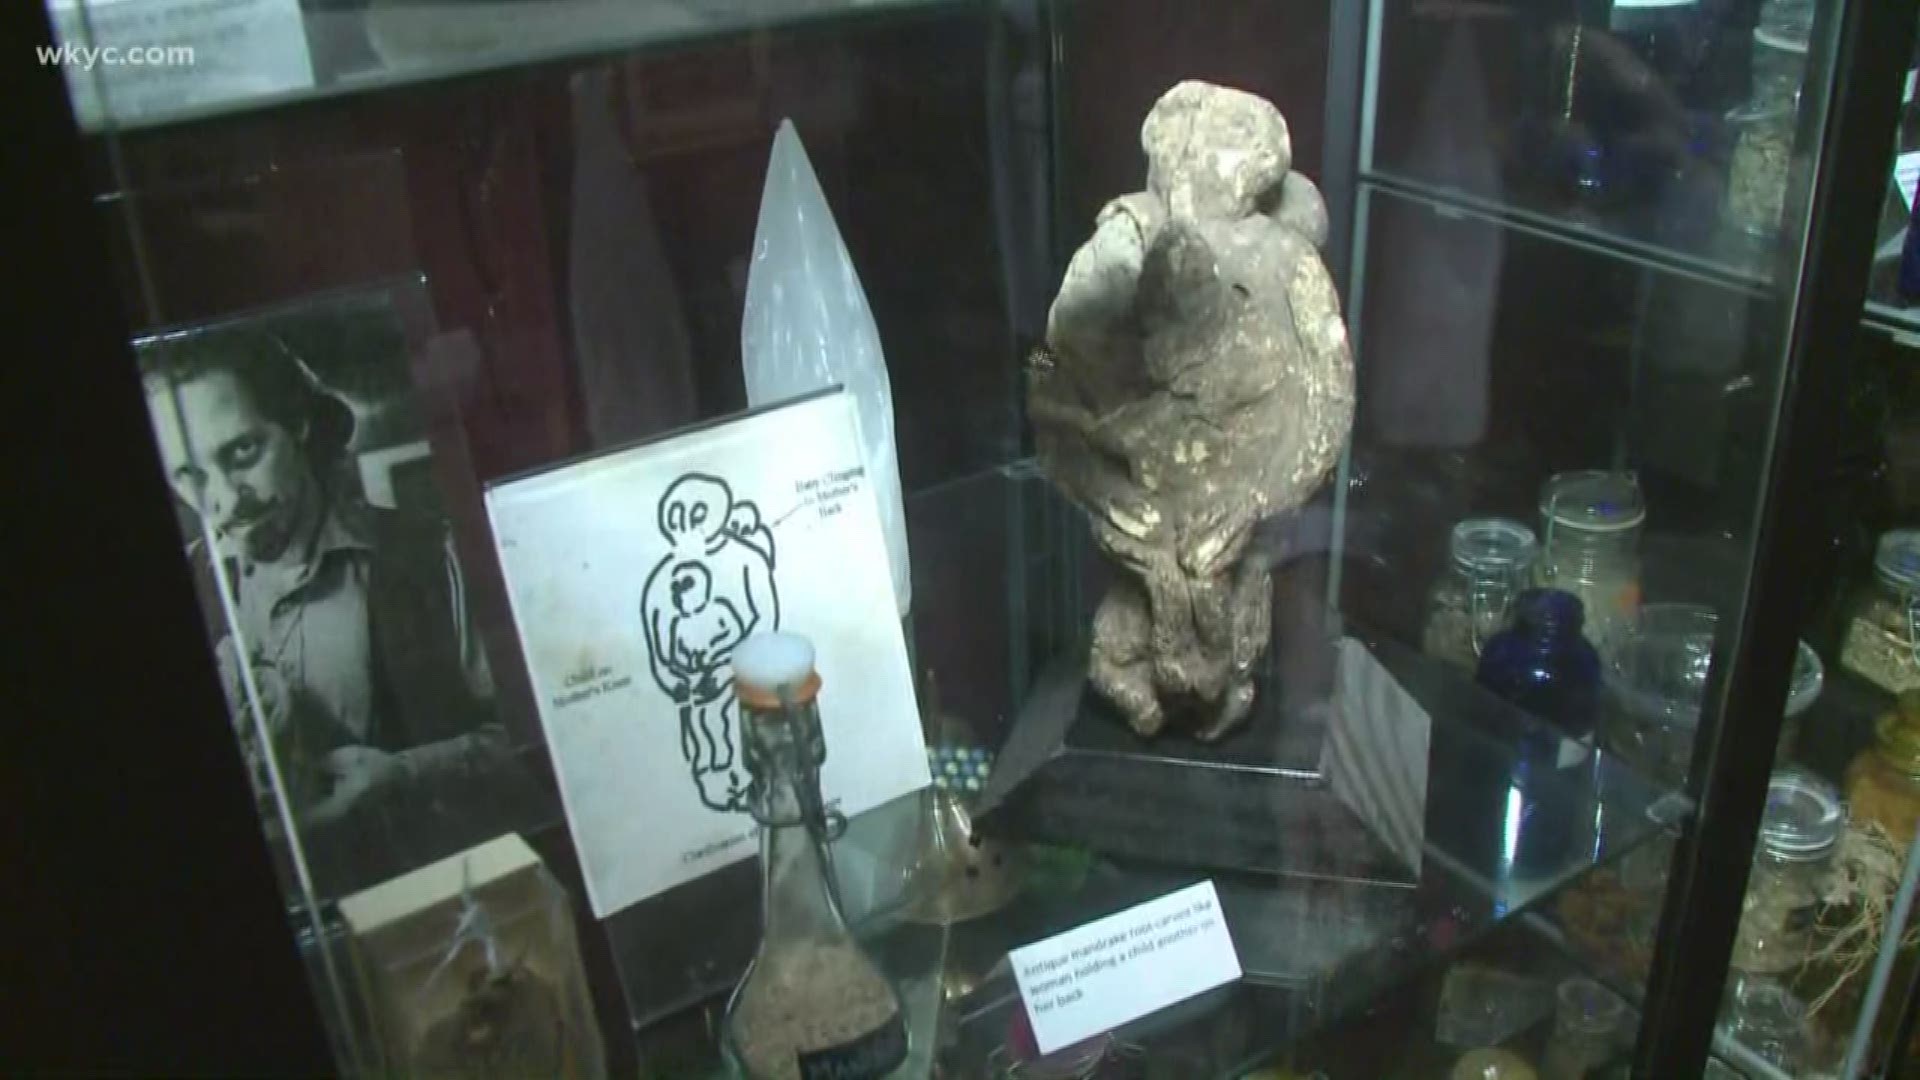 Oct. 31, 2019: It's Halloween, so we sent Austin Love to explore the ancient artifacts inside the Buckland Museum of Witchcraft and Magic.